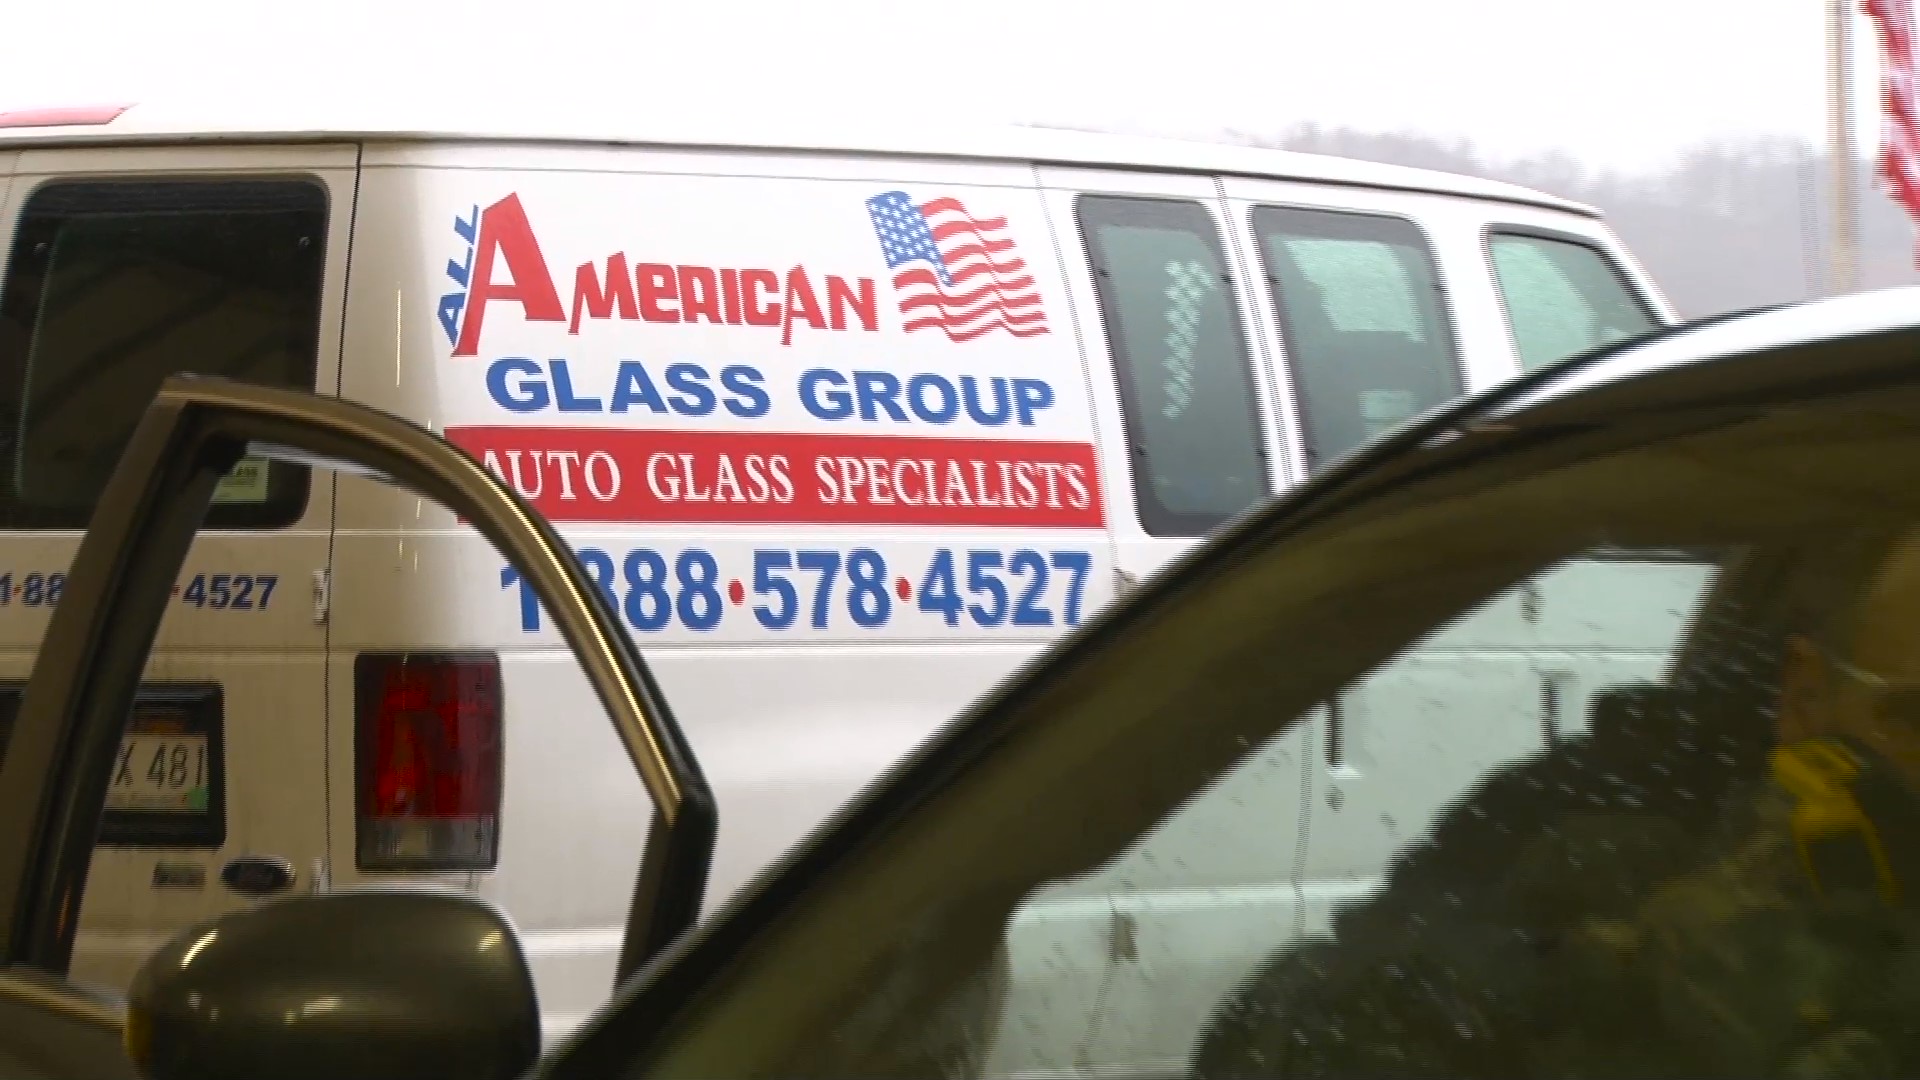 All American Glass Group